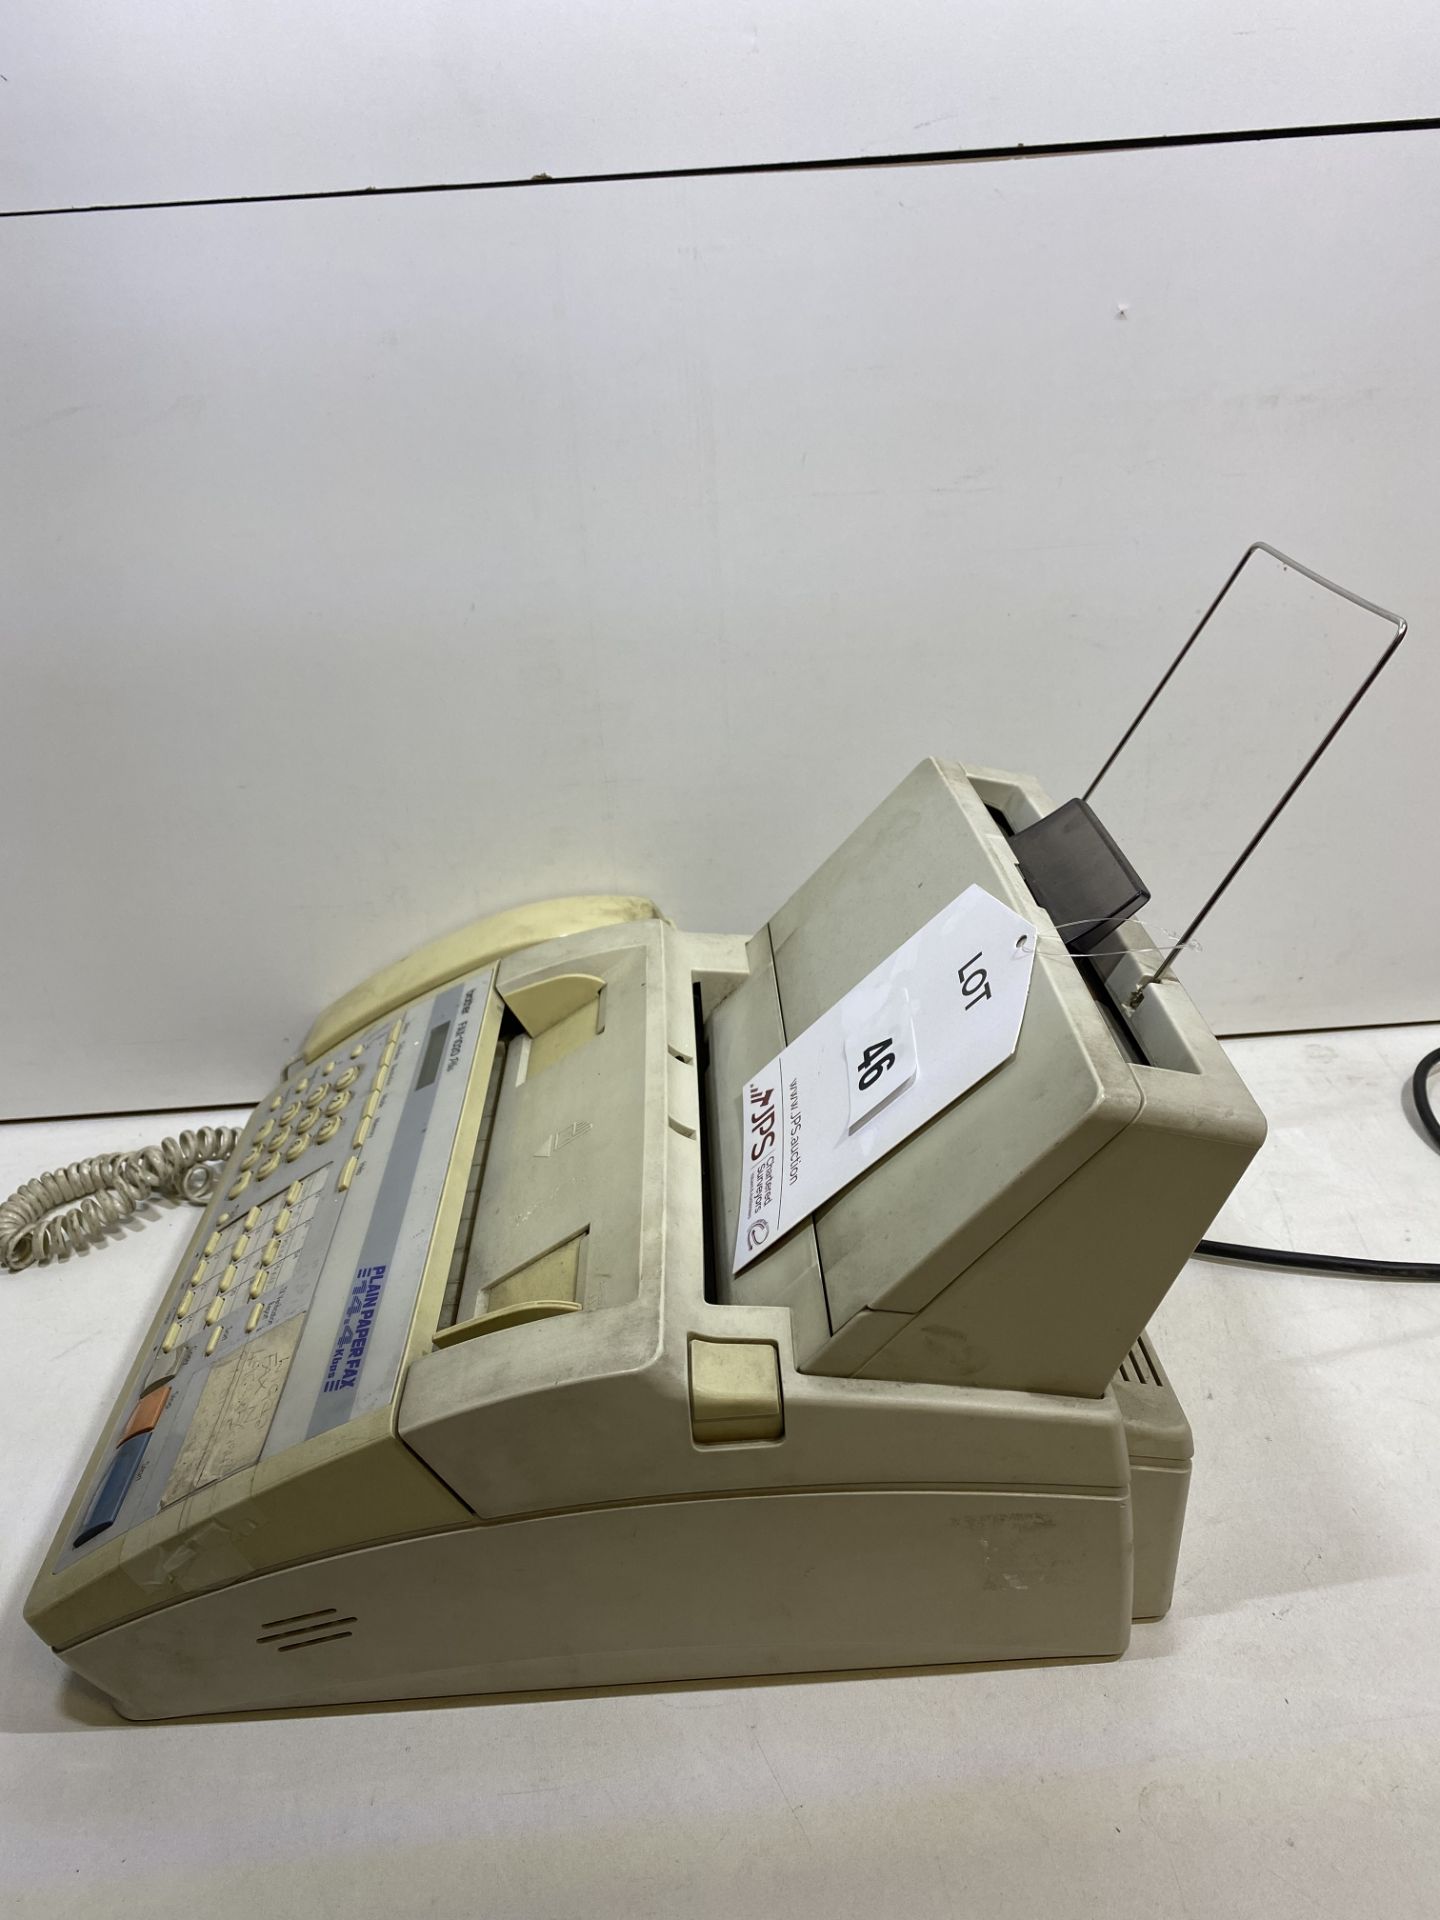 Brother FAX-1020 Plus Fax Machine - Image 6 of 7